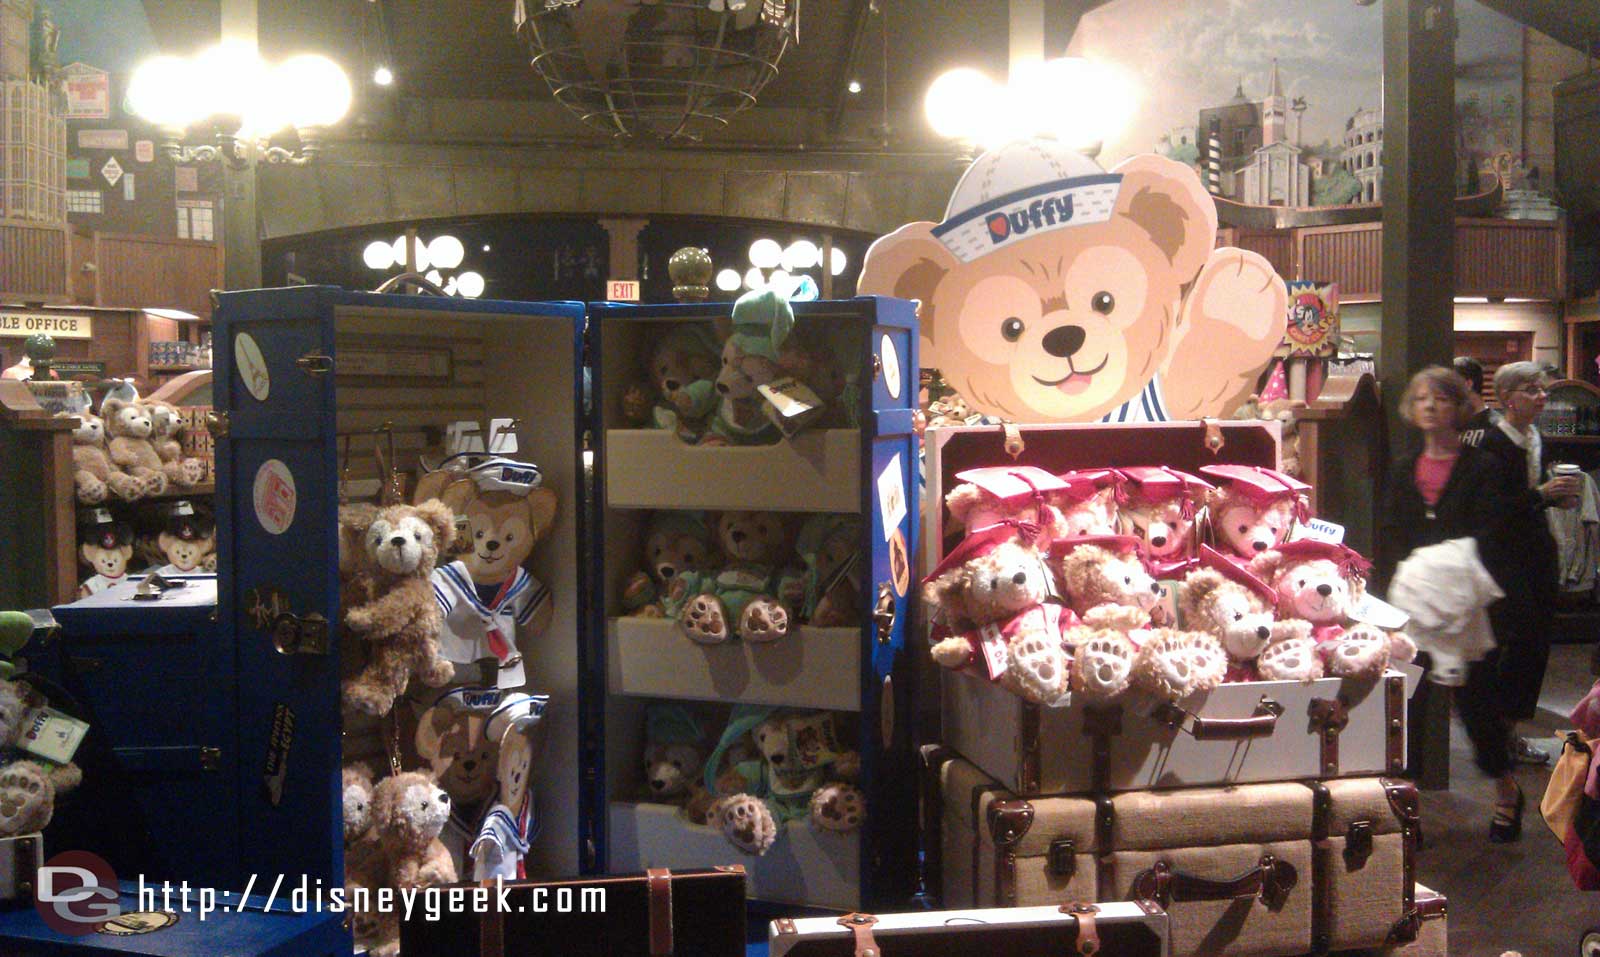 For all you Duffy fans a look into Duffy central